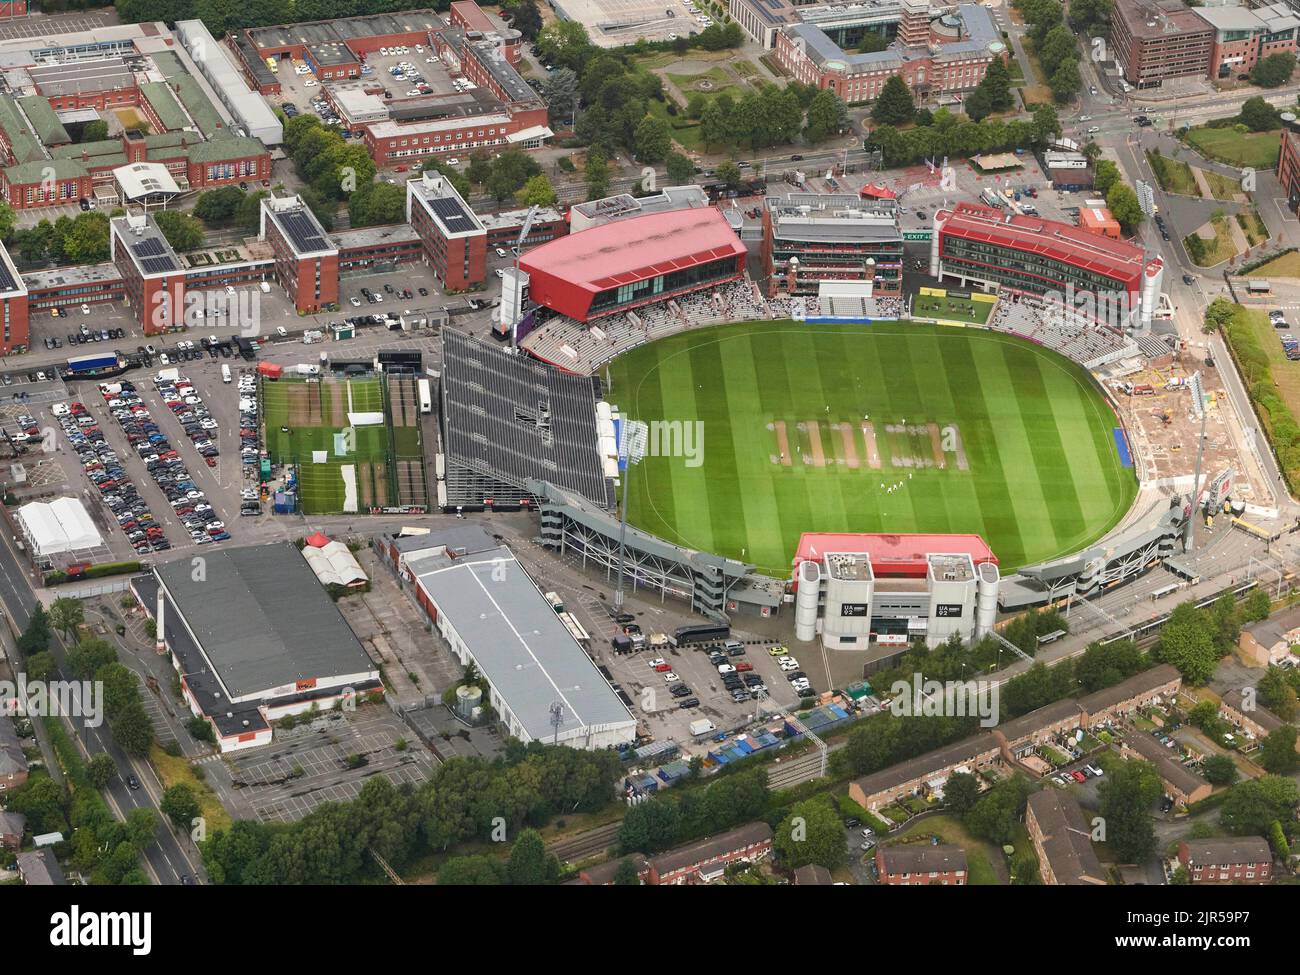 An aerial Photograph of Old Trafford cricket ground, home of Lancashire cricketing team, Manchester, north west England, UK Stock Photo